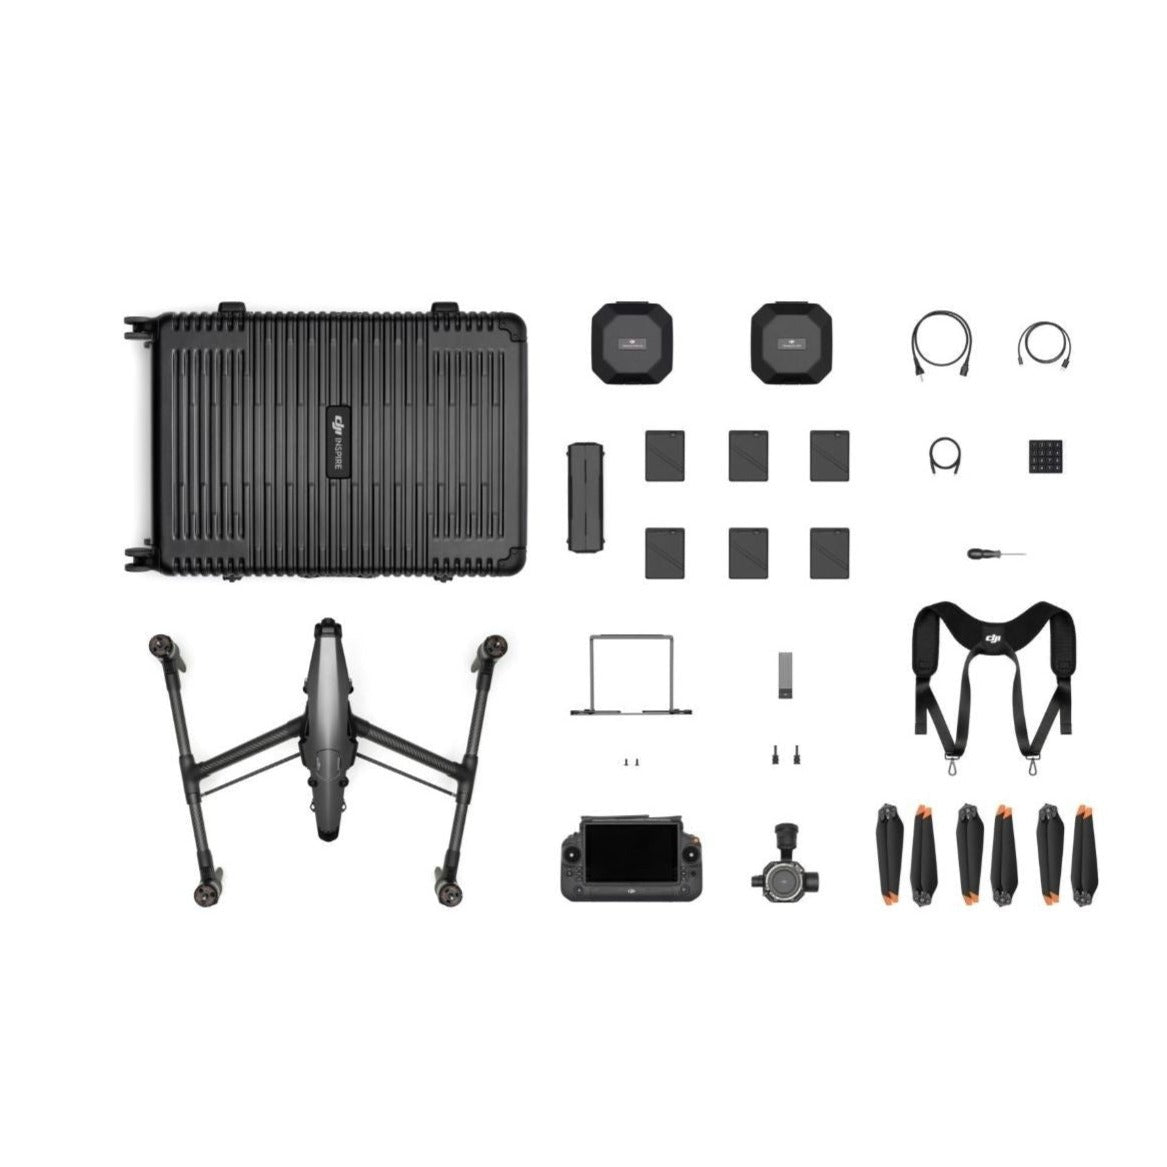 Product Image of DJI Inspire 3 Combo Drone